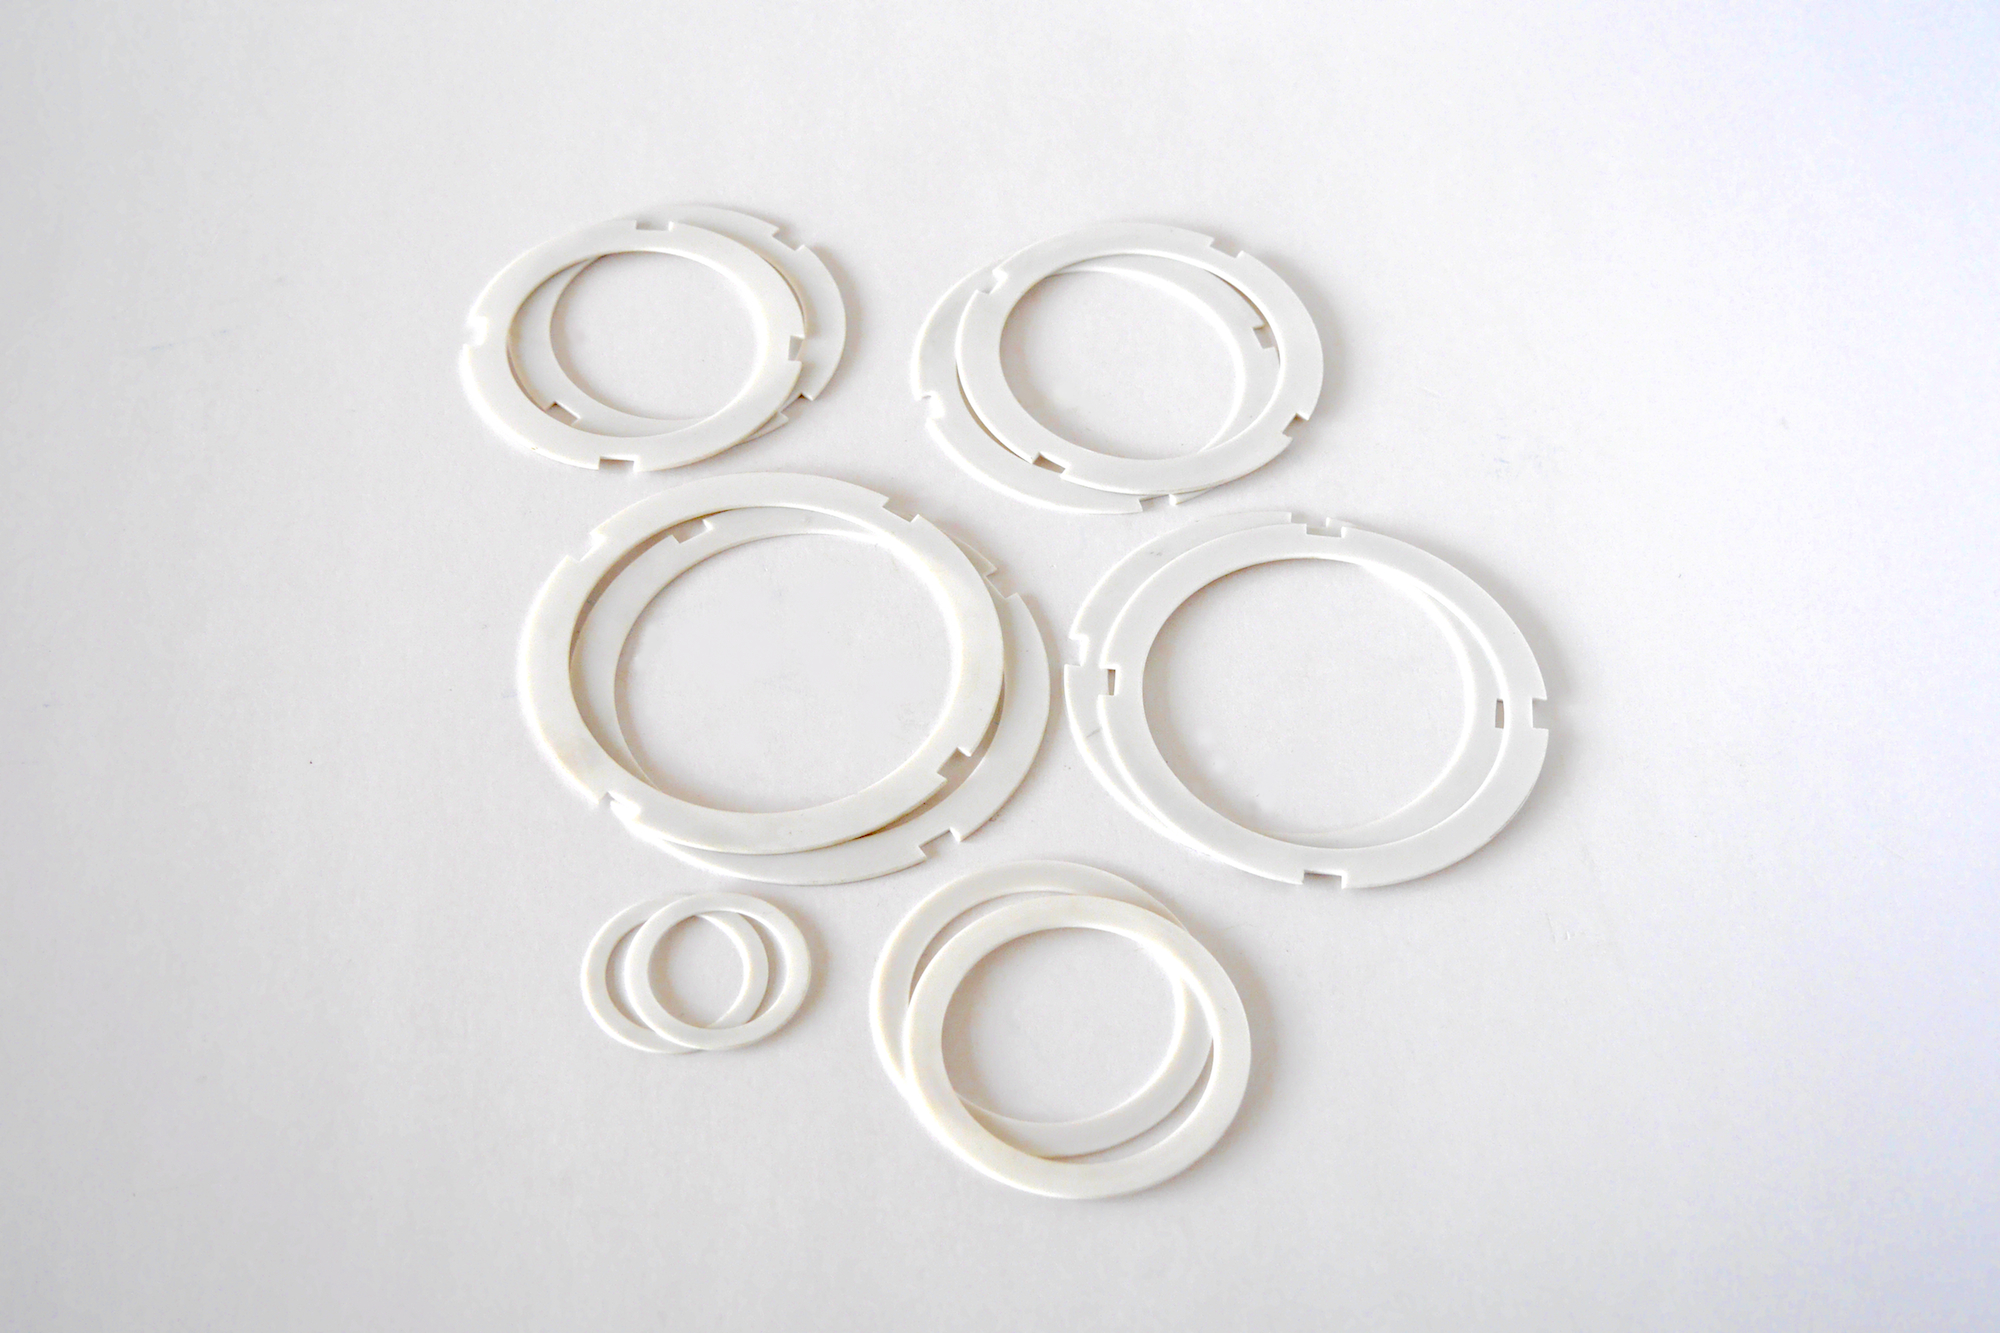 Vesconite Hilube wear rings. These were demonstrated to not delaminate even when exposed to water of poor-quality.